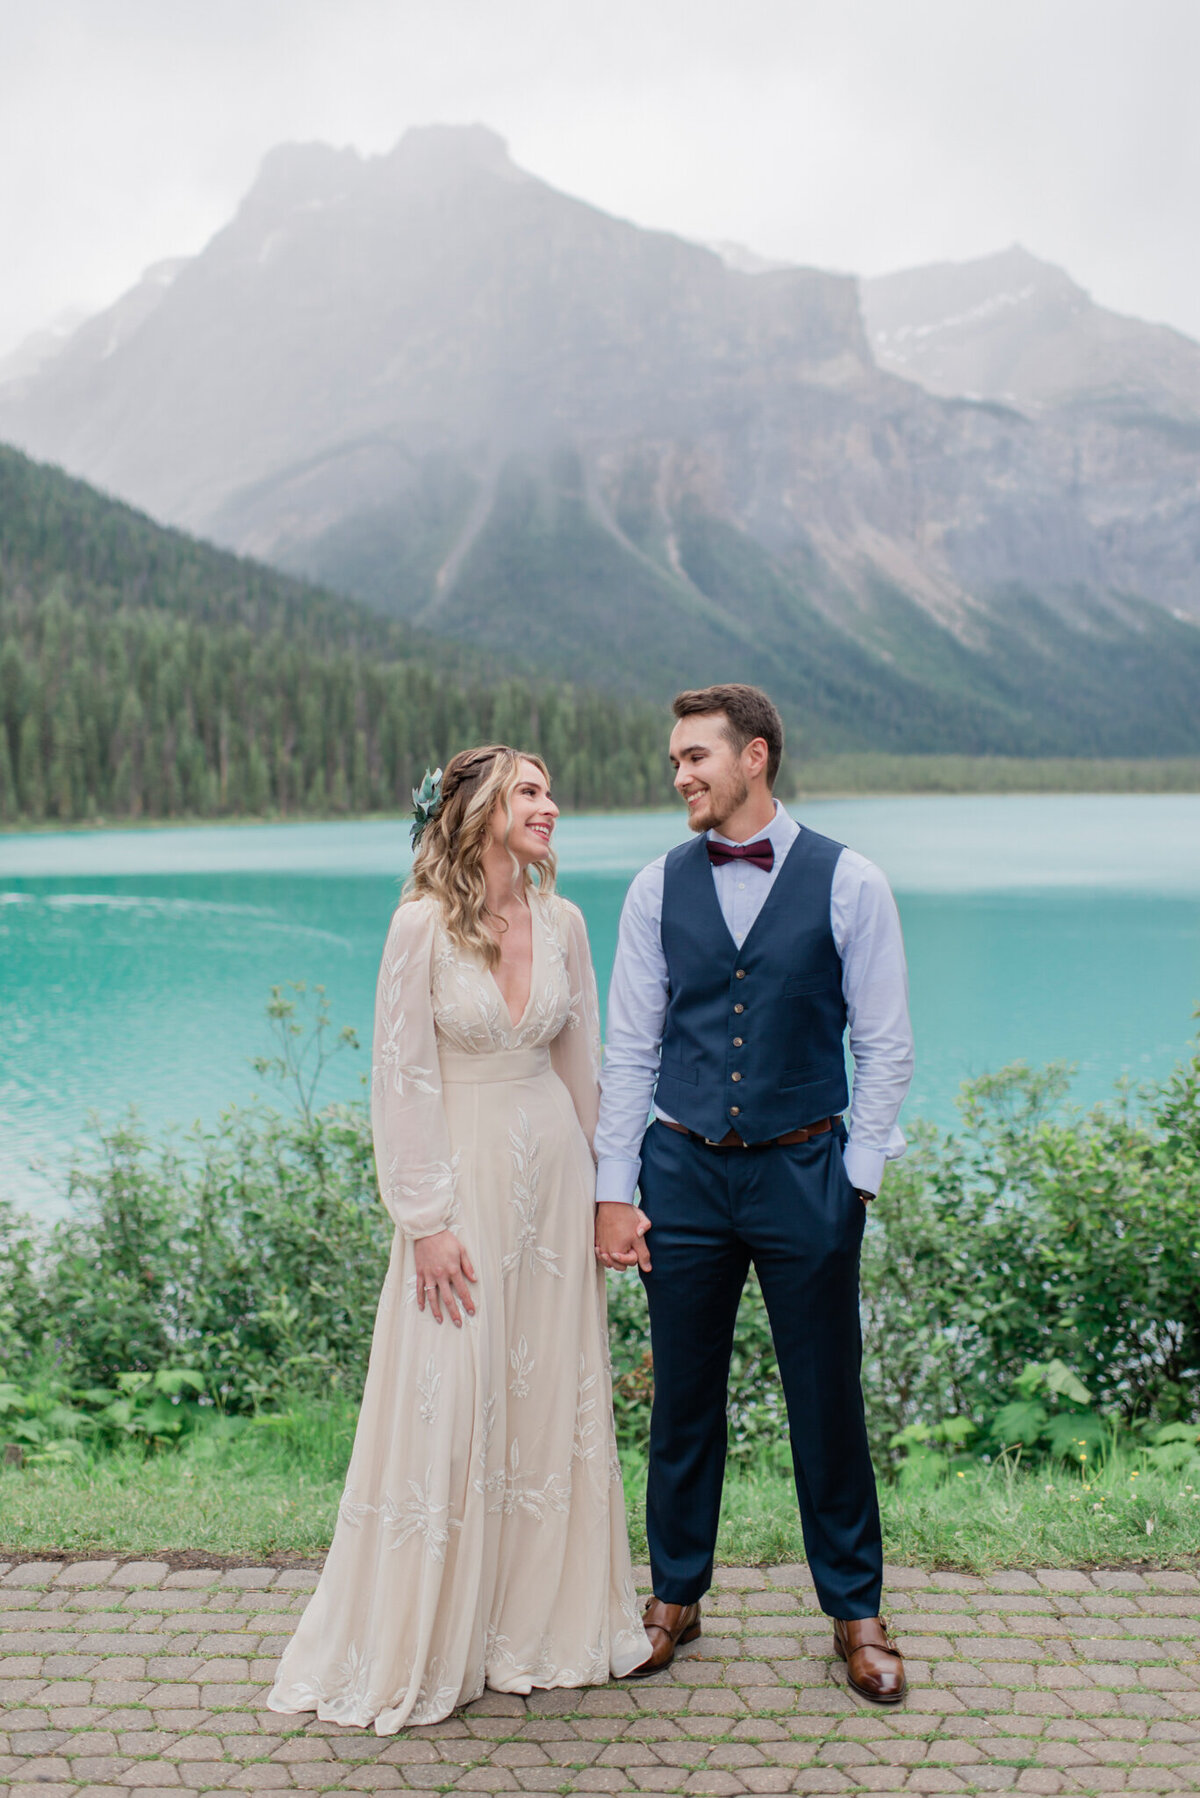 Stunning and elegant couple standing in mountains of Emerald Lake  , bride wearing gorgeous BHLDN cream gown, groom in navy blue suit vest, captured by Kaity Body Photography, elegant film inspired wedding photographer in Calgary, Alberta. Featured on the Bronte Bride Vendor Guide.